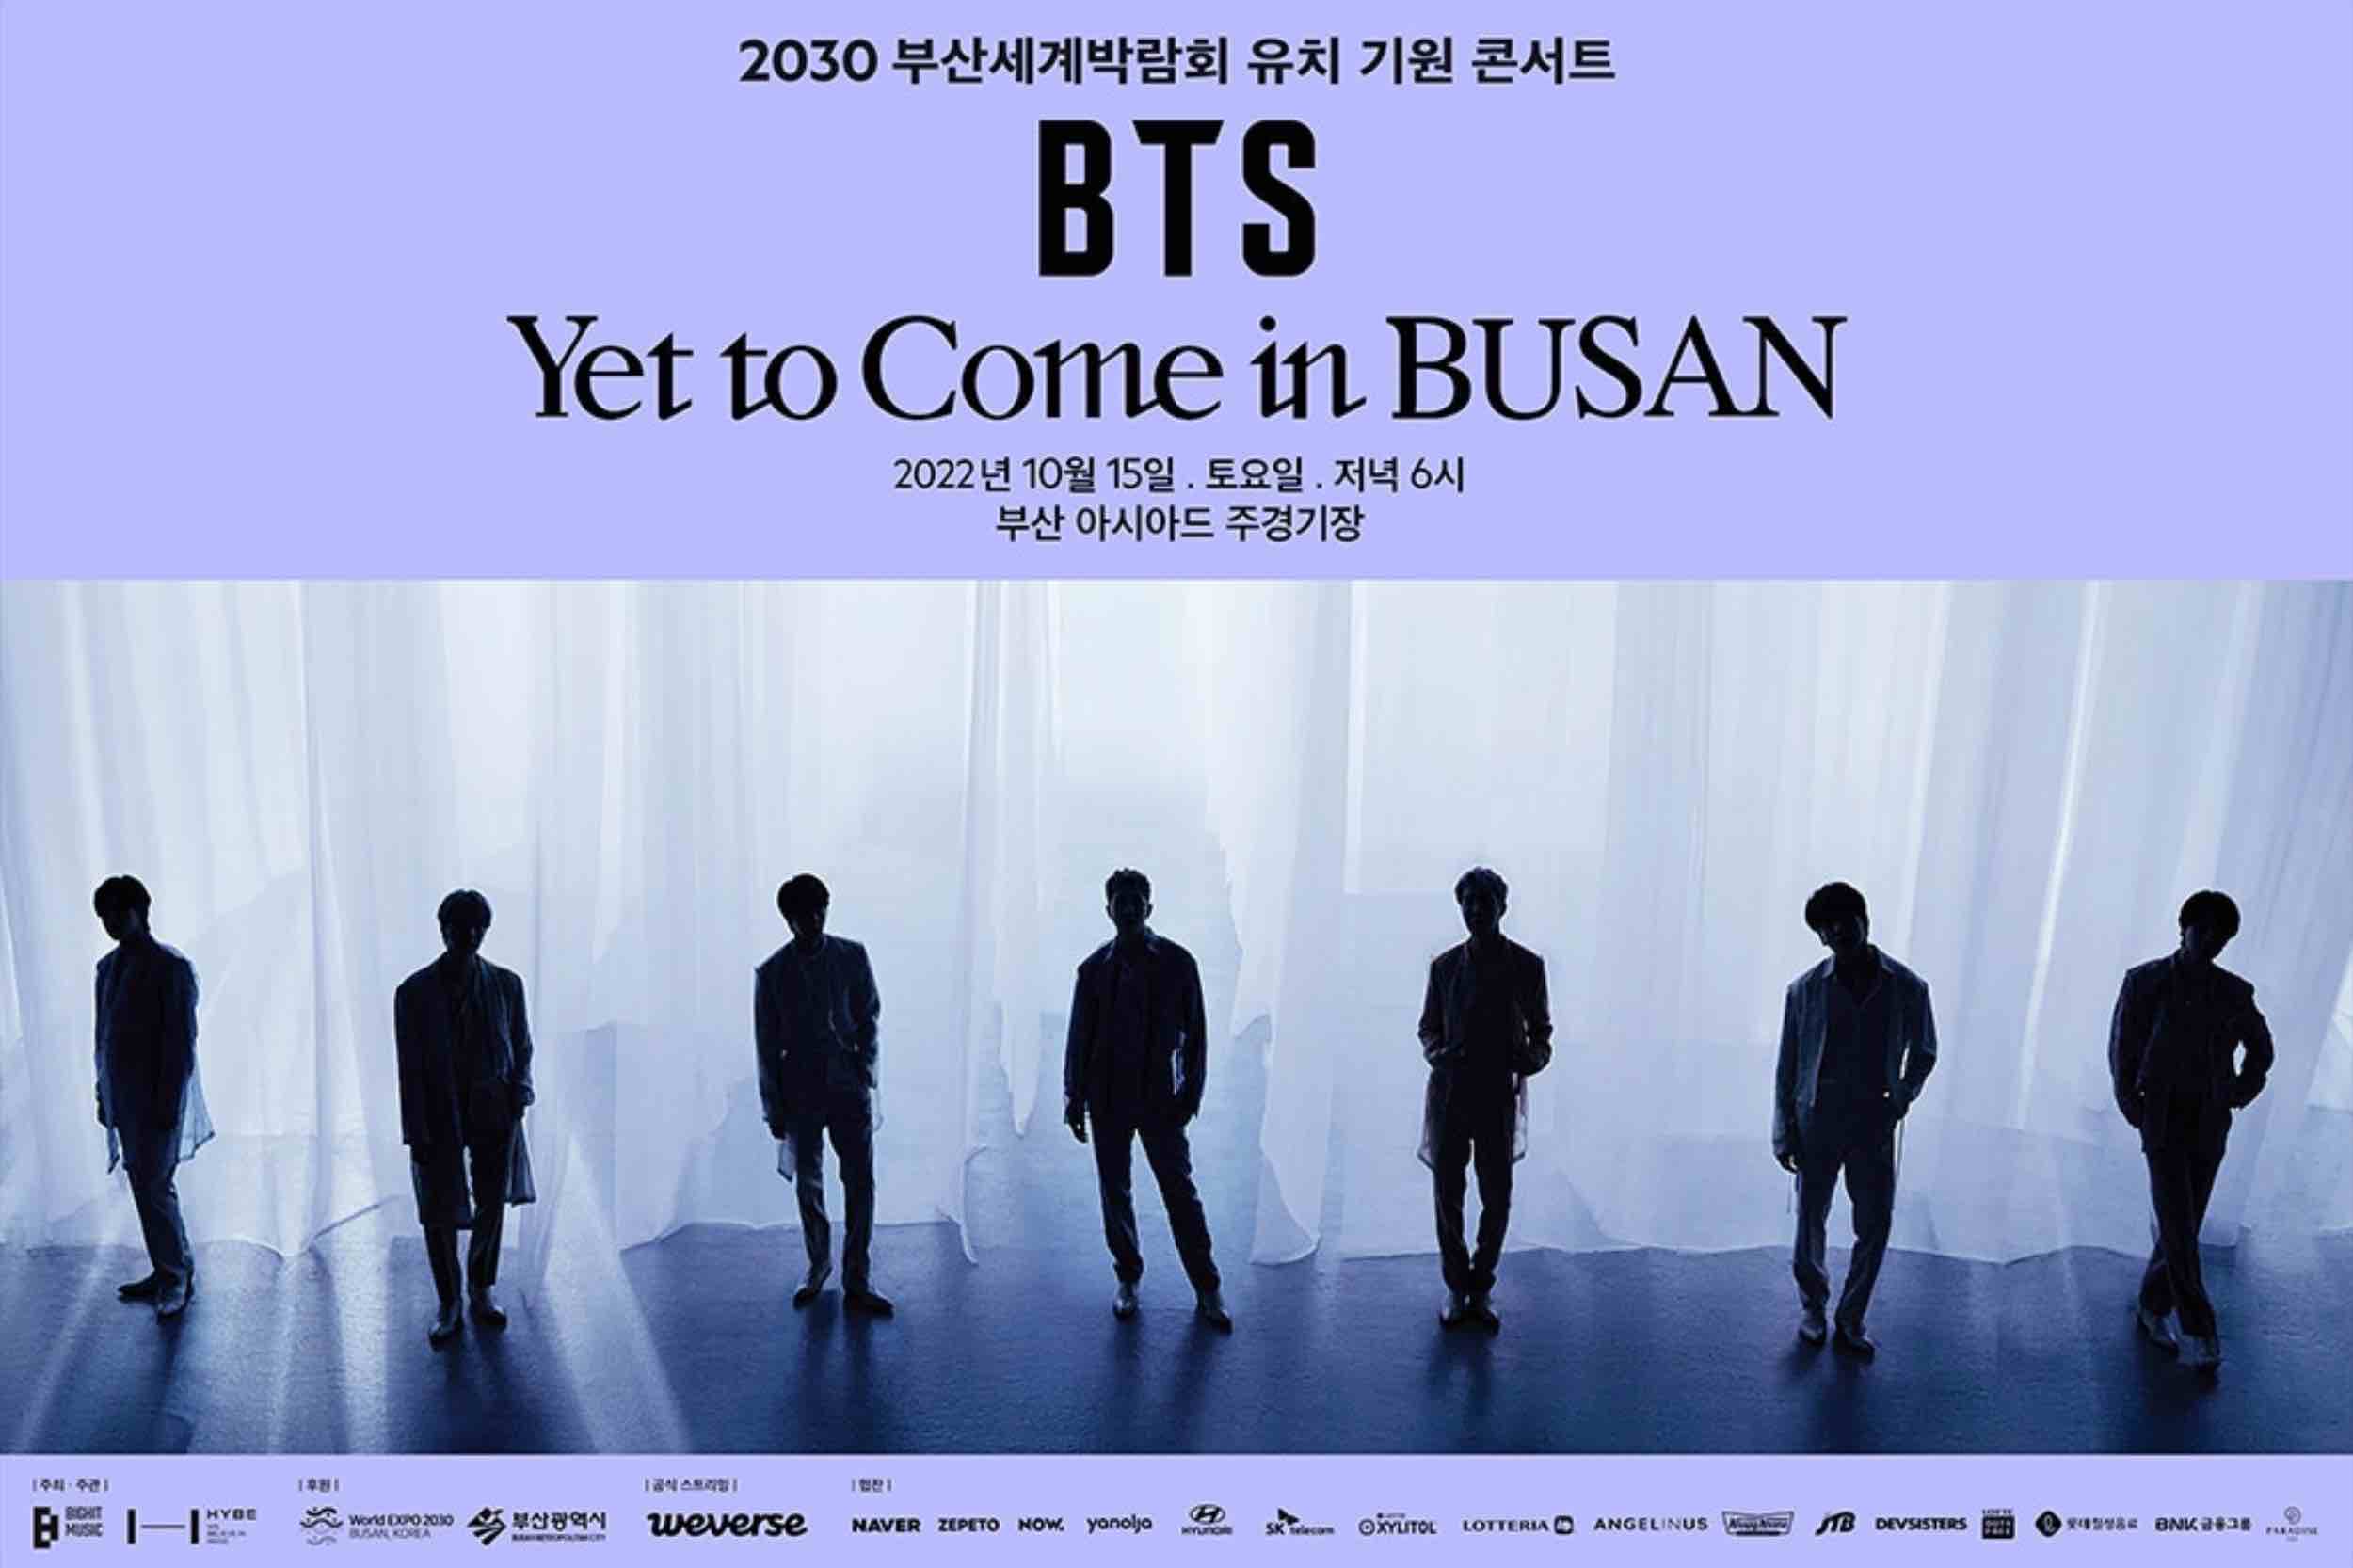 BTS shows an exclusive Yet to Come of the Busan Concert and looks 